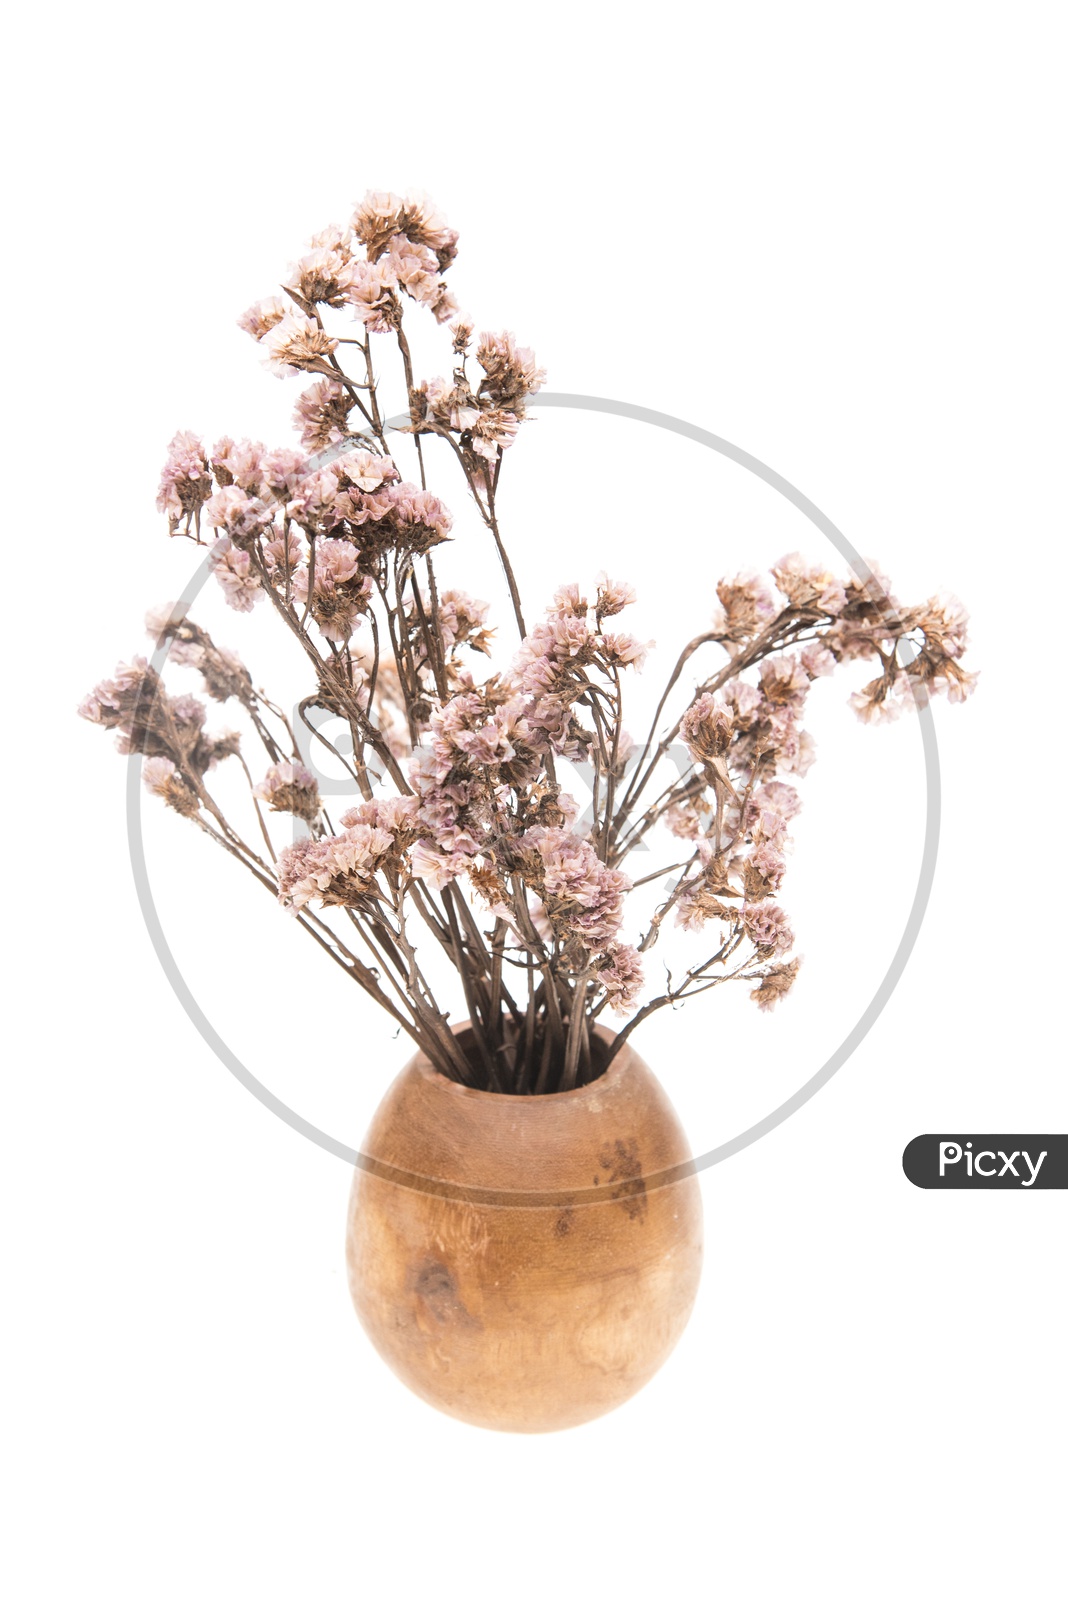 Dried flowers in a wooden vase isolated on white background